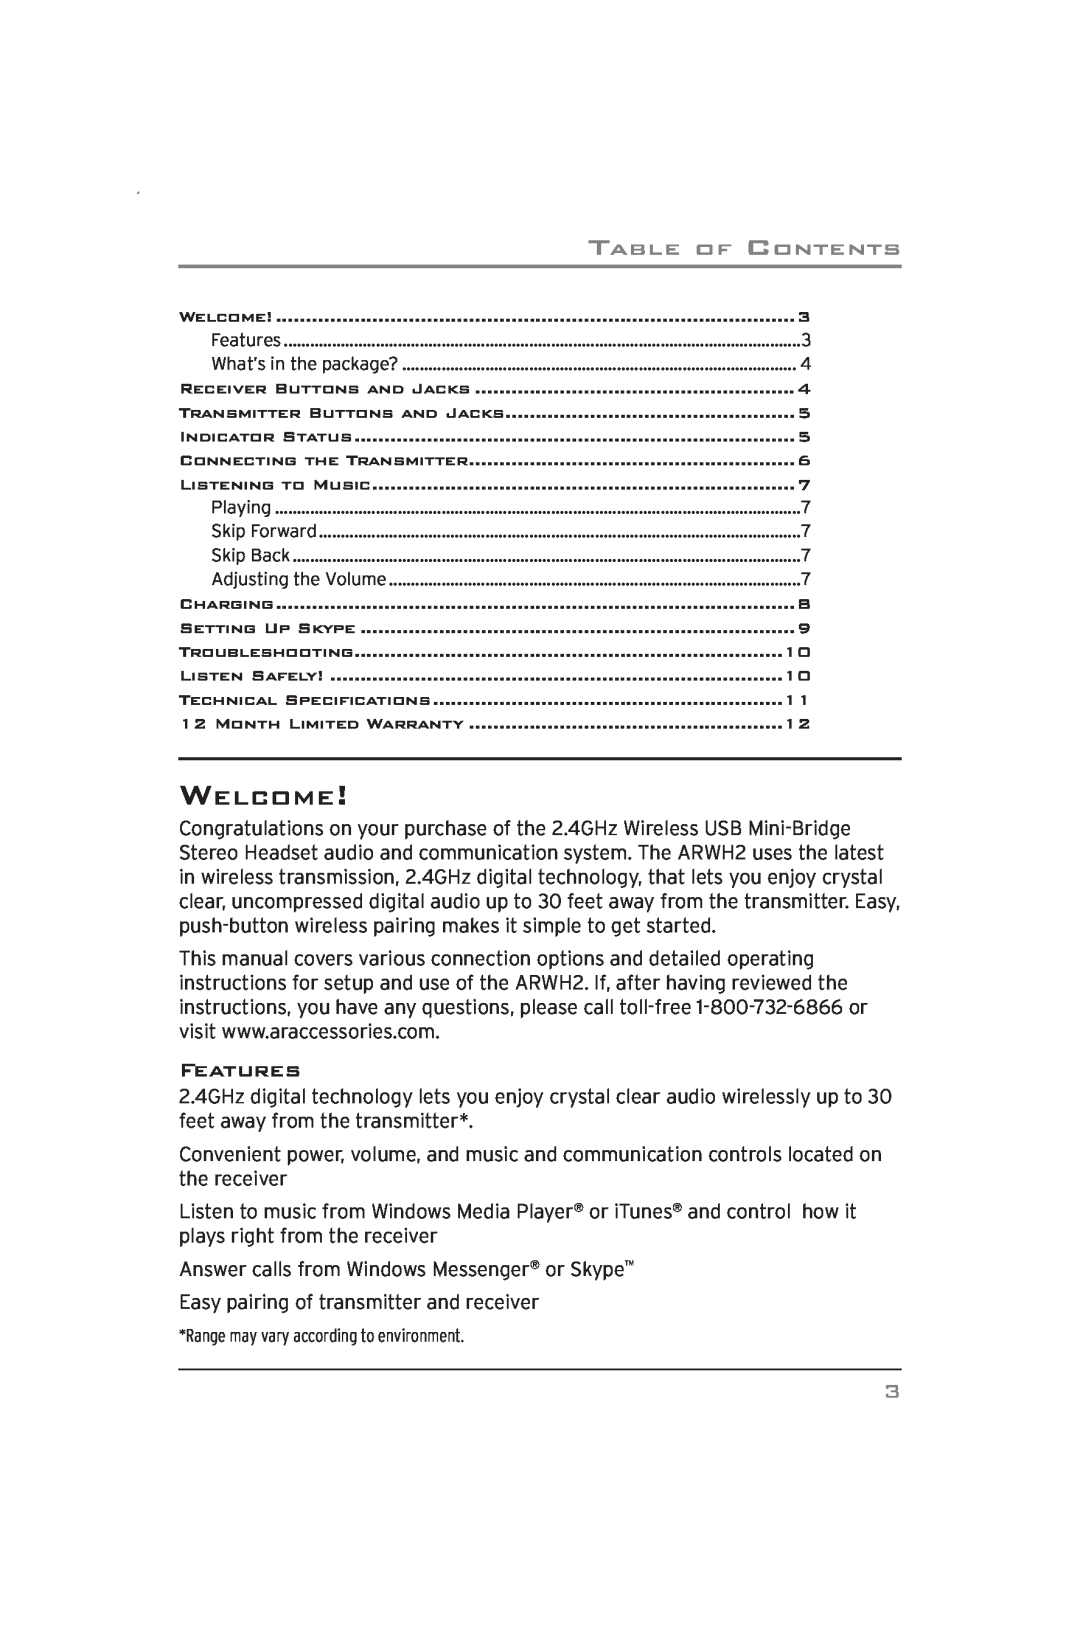 Acoustic Research ARWH2 user manual Welcome, Features 